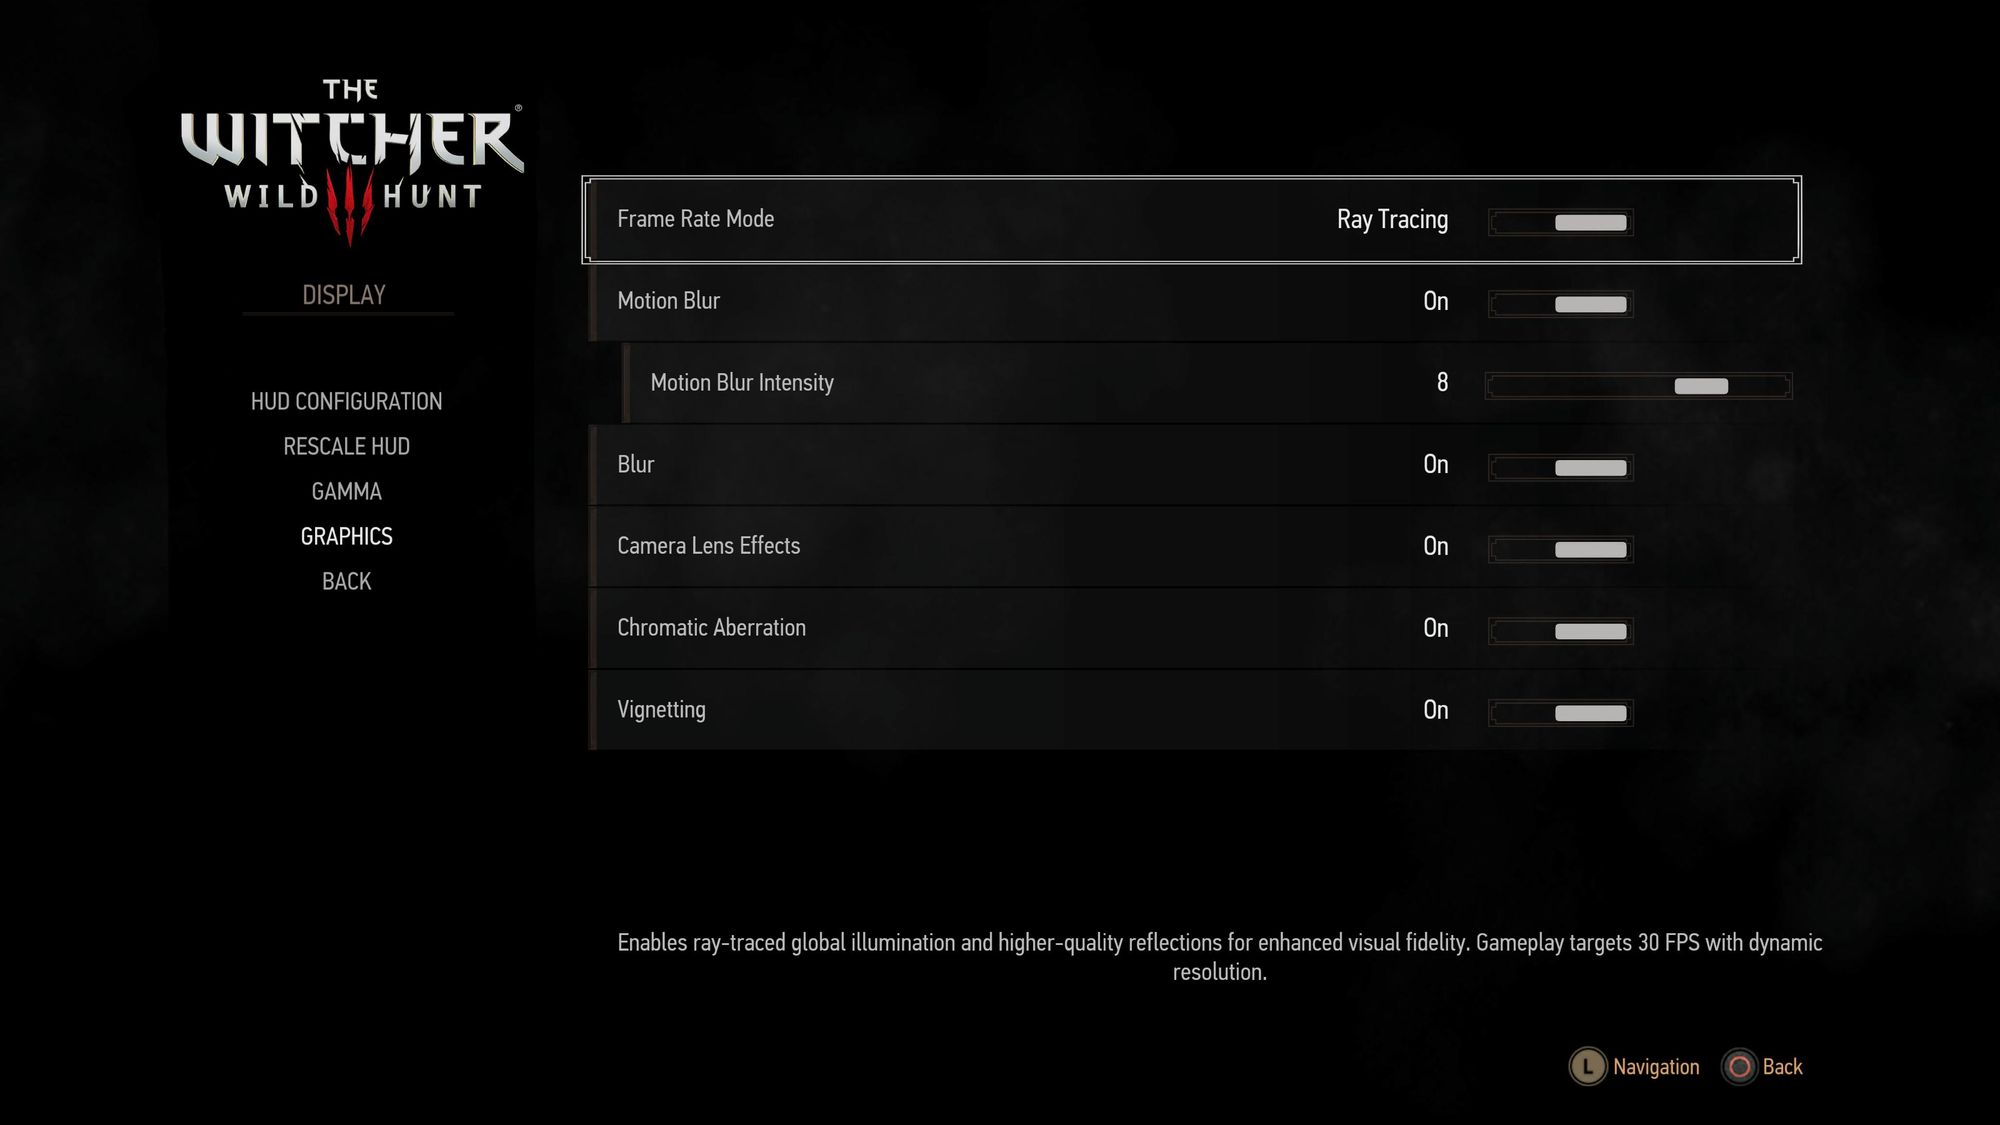 Menu screen from The Witcher 3 showing "Frame Rate Mode: Ray Tracing"